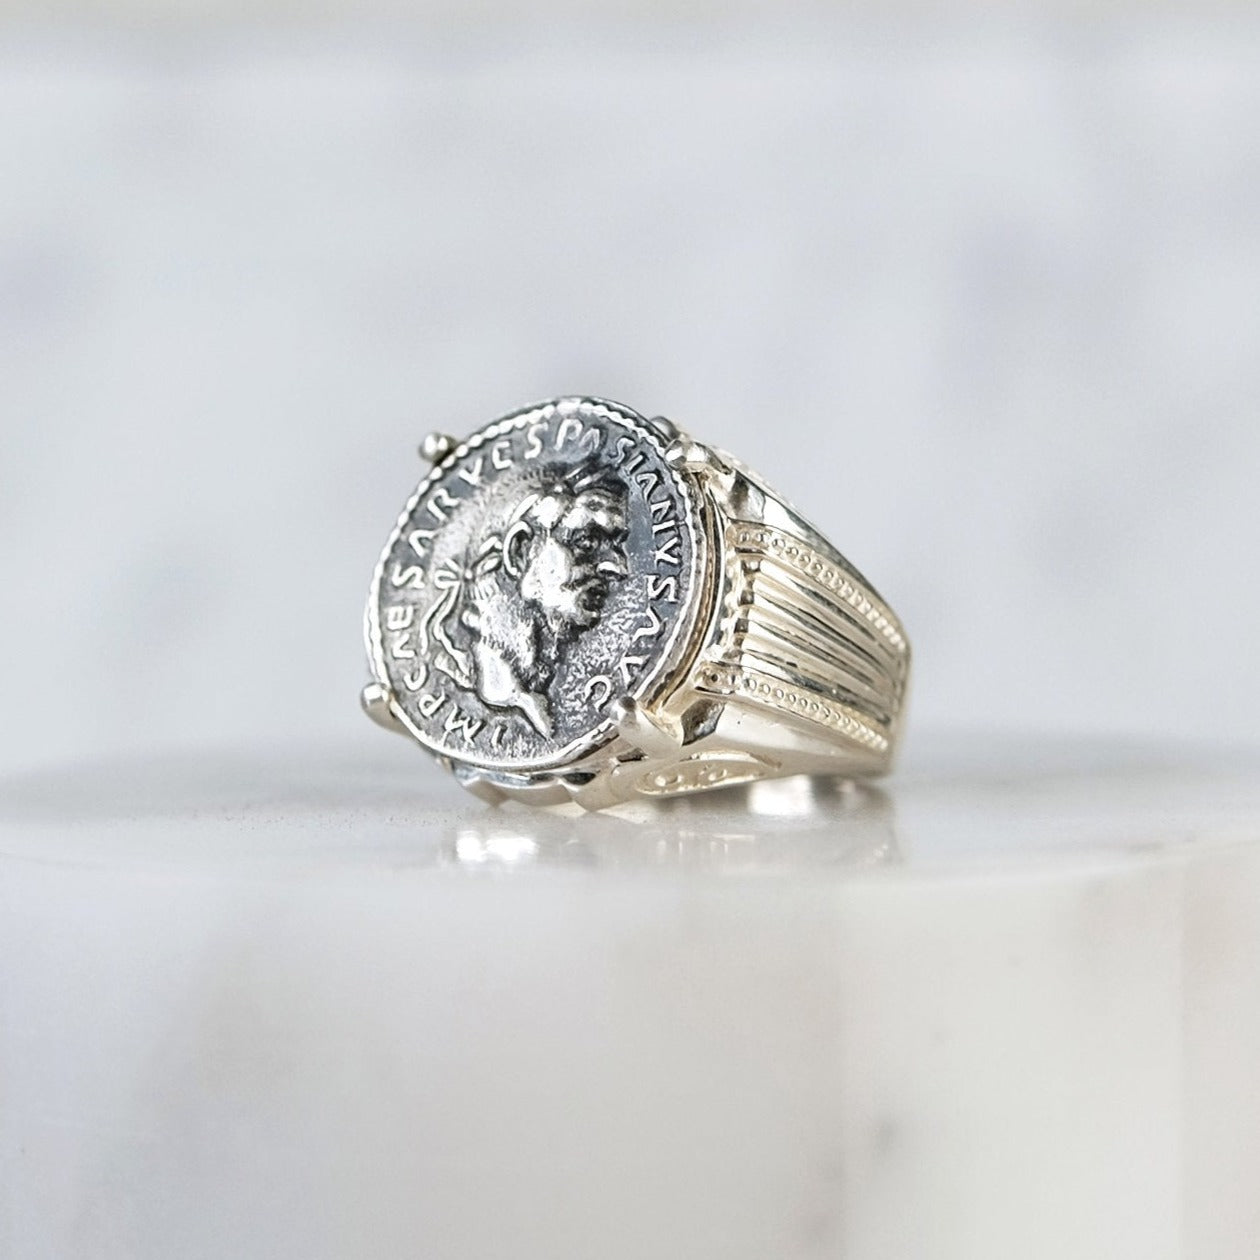 The Madstone unisex Roman coin signet ring